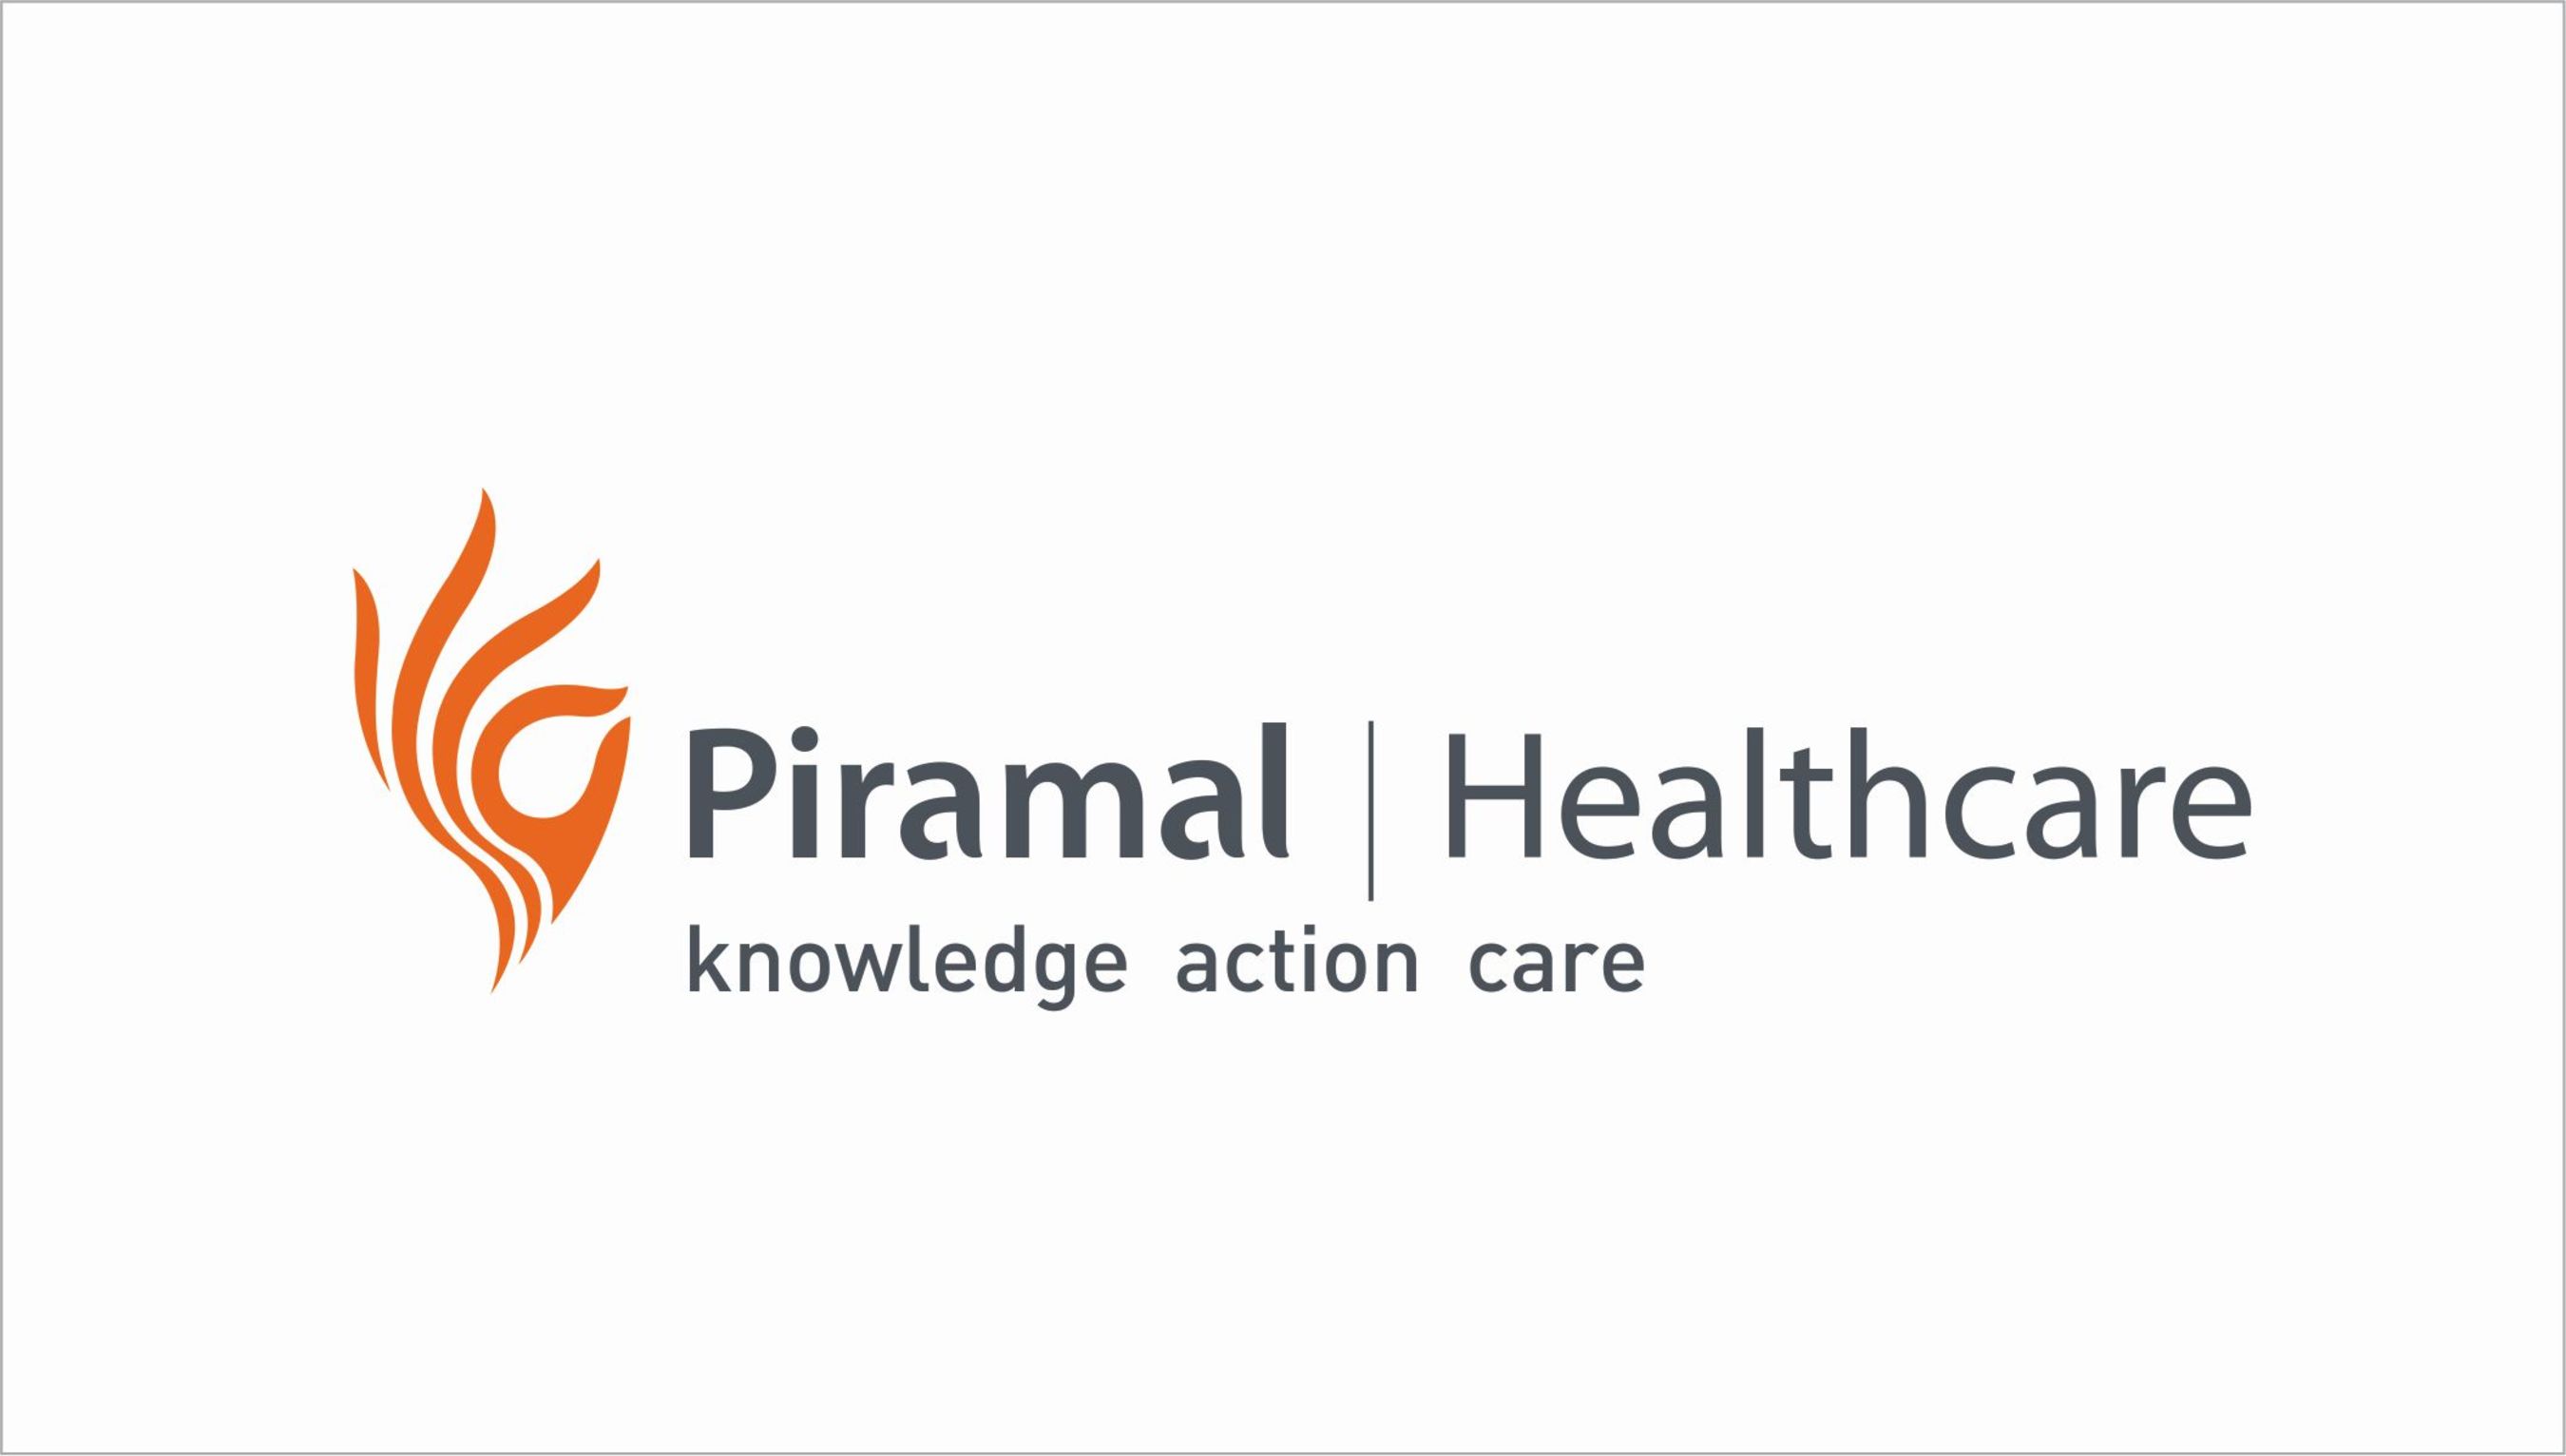 piramal-healthcare-limited-to-acquire-decision-resources-group